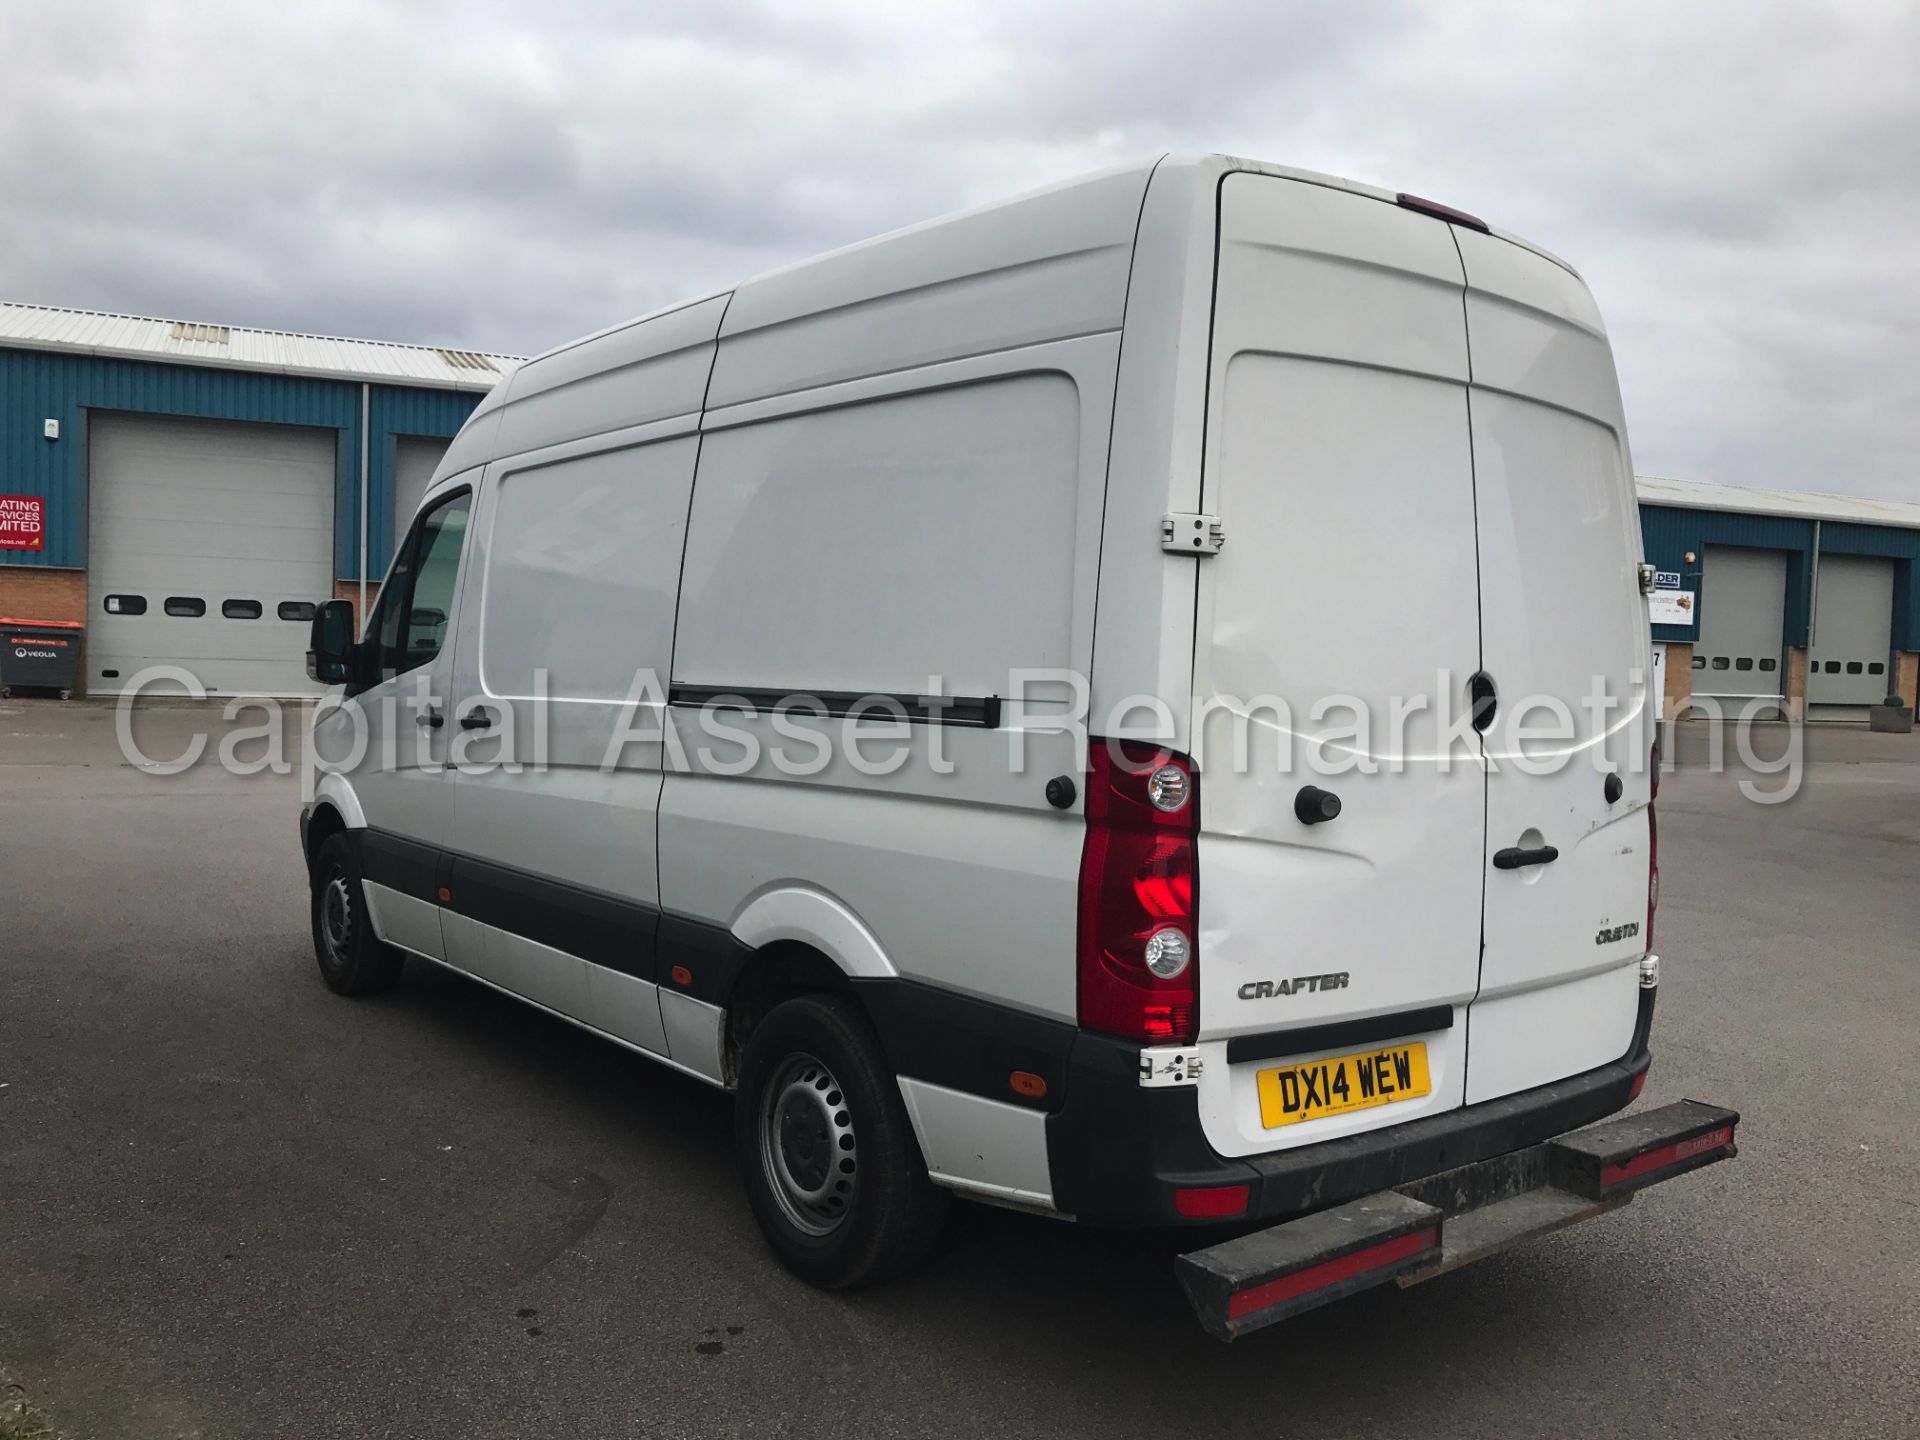 VOLKSWAGEN CRAFTER CR35 'MWB HI-ROOF' (2014) '2.0 TDI - 109 PS - 6 SPEED' *1 COMPANY OWNER FROM NEW* - Image 7 of 19